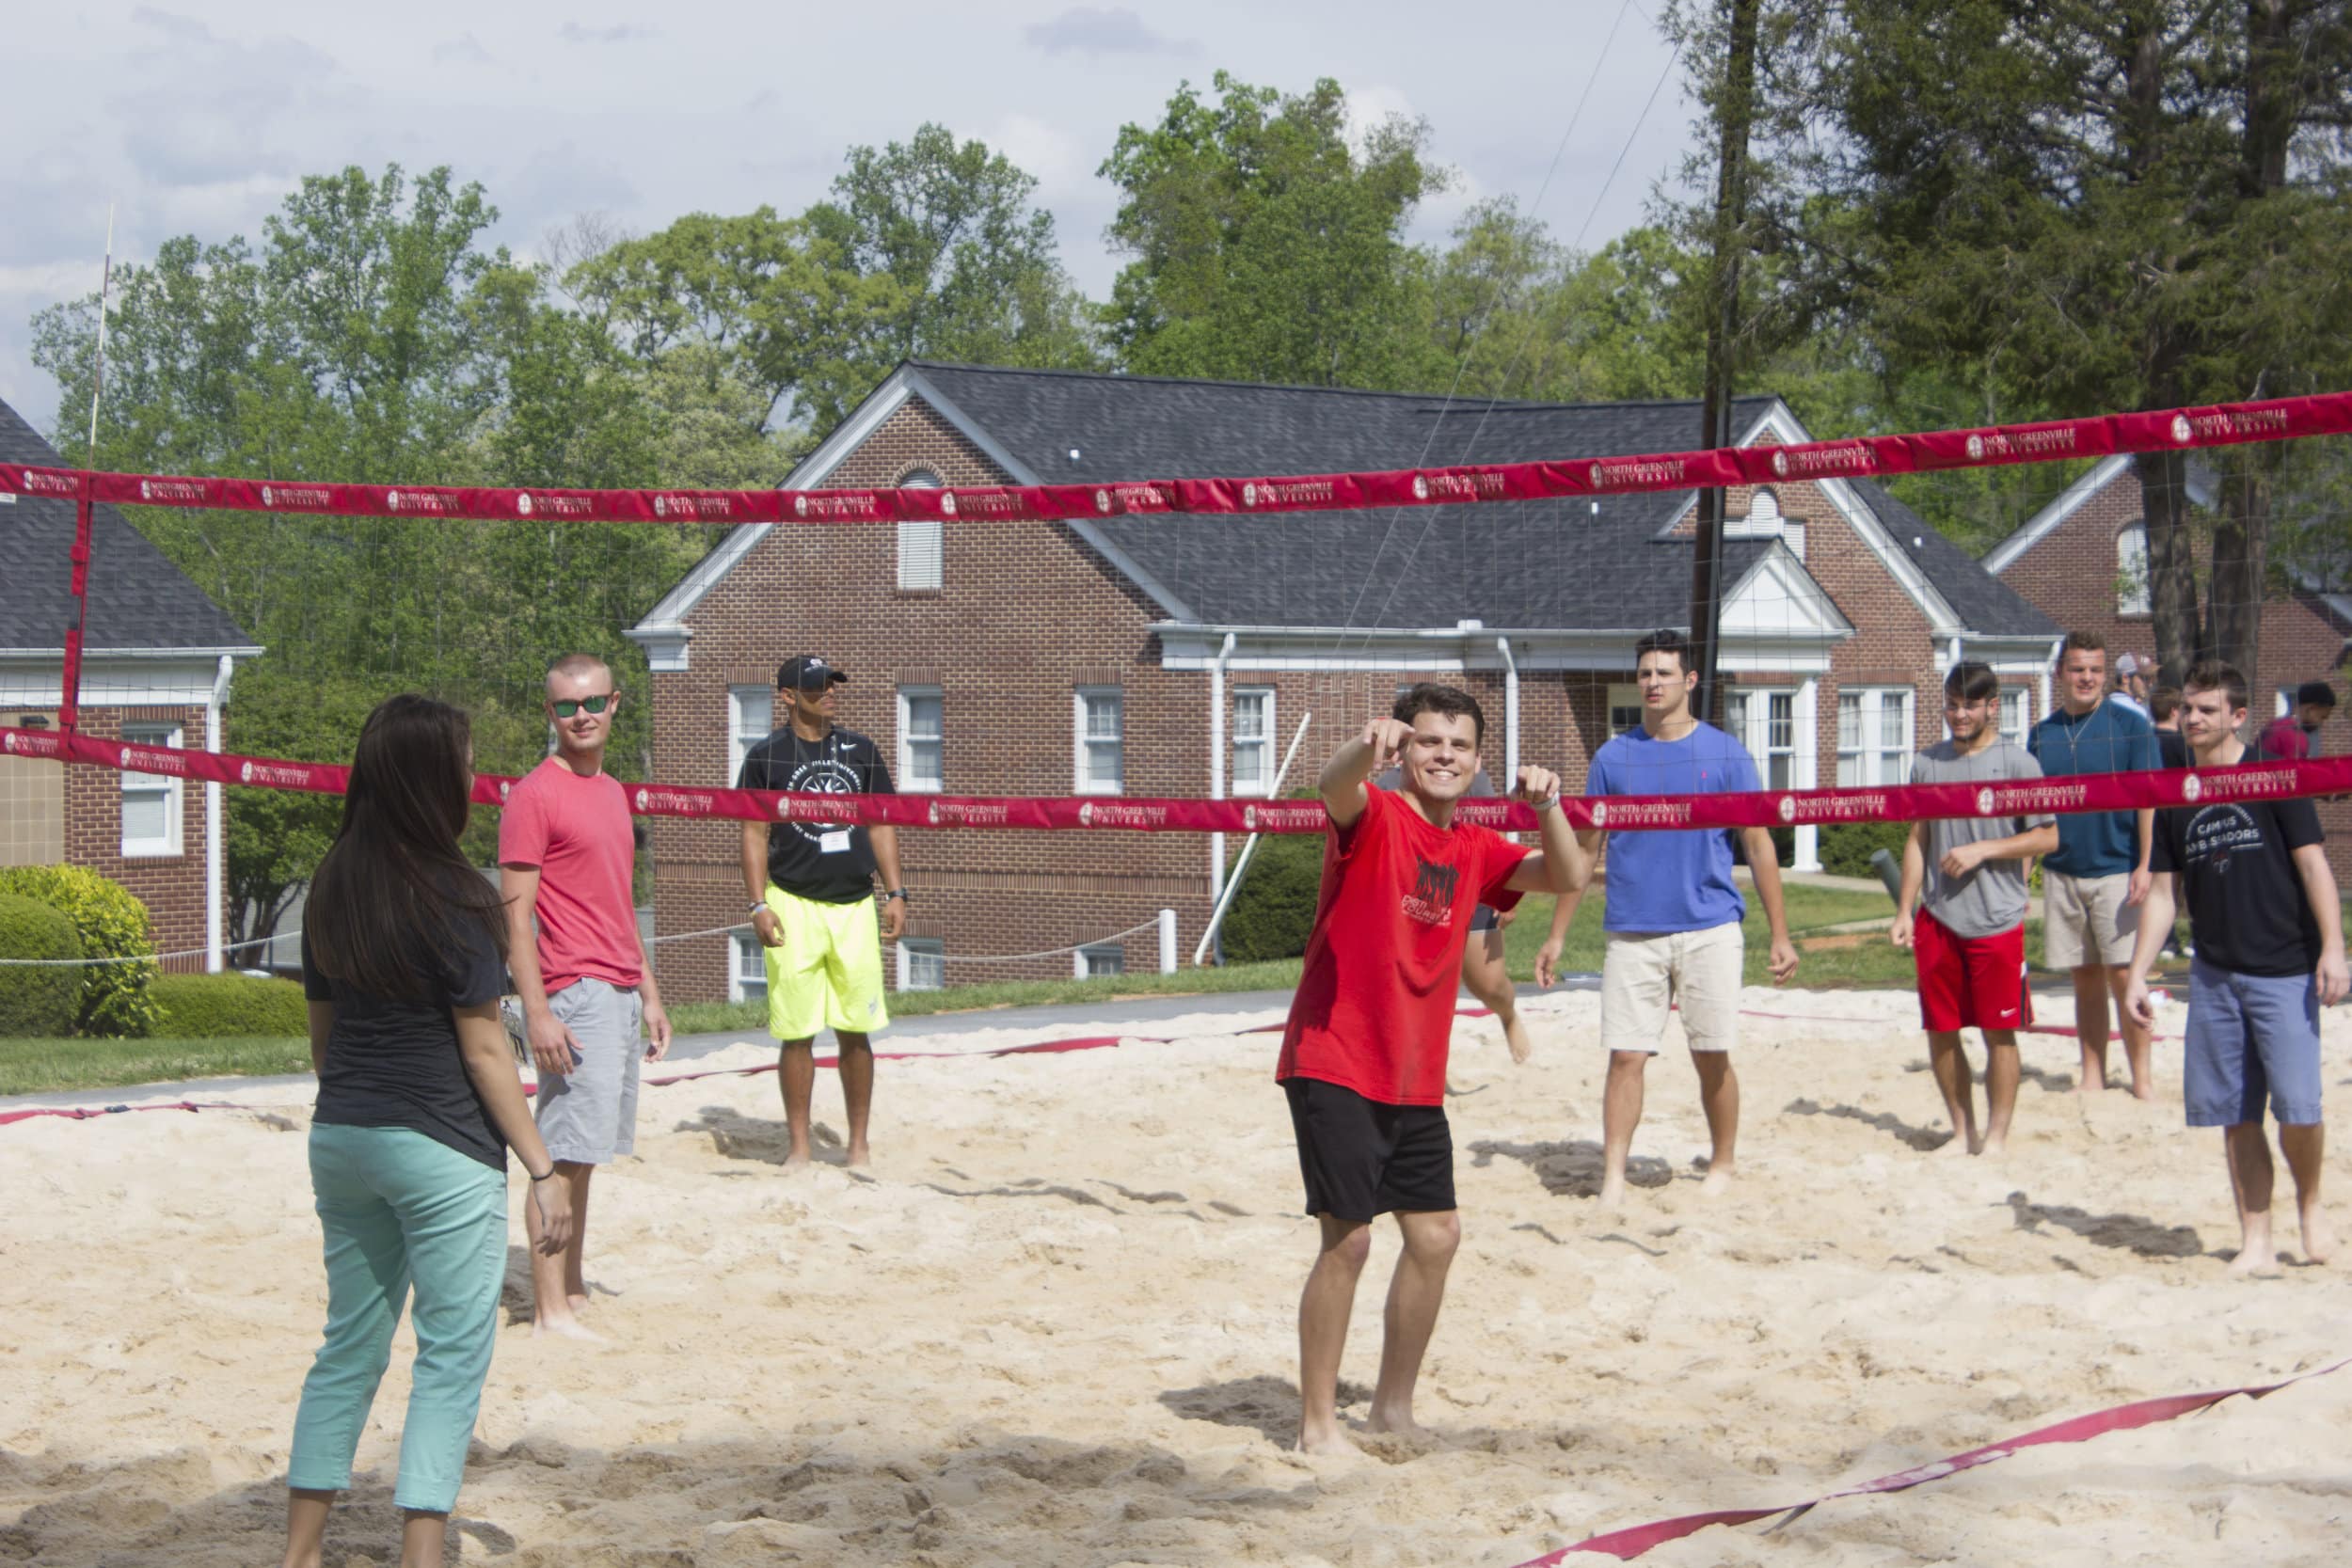 Current NGU students take part in a game of sand volleyball with the incoming freshmen class.